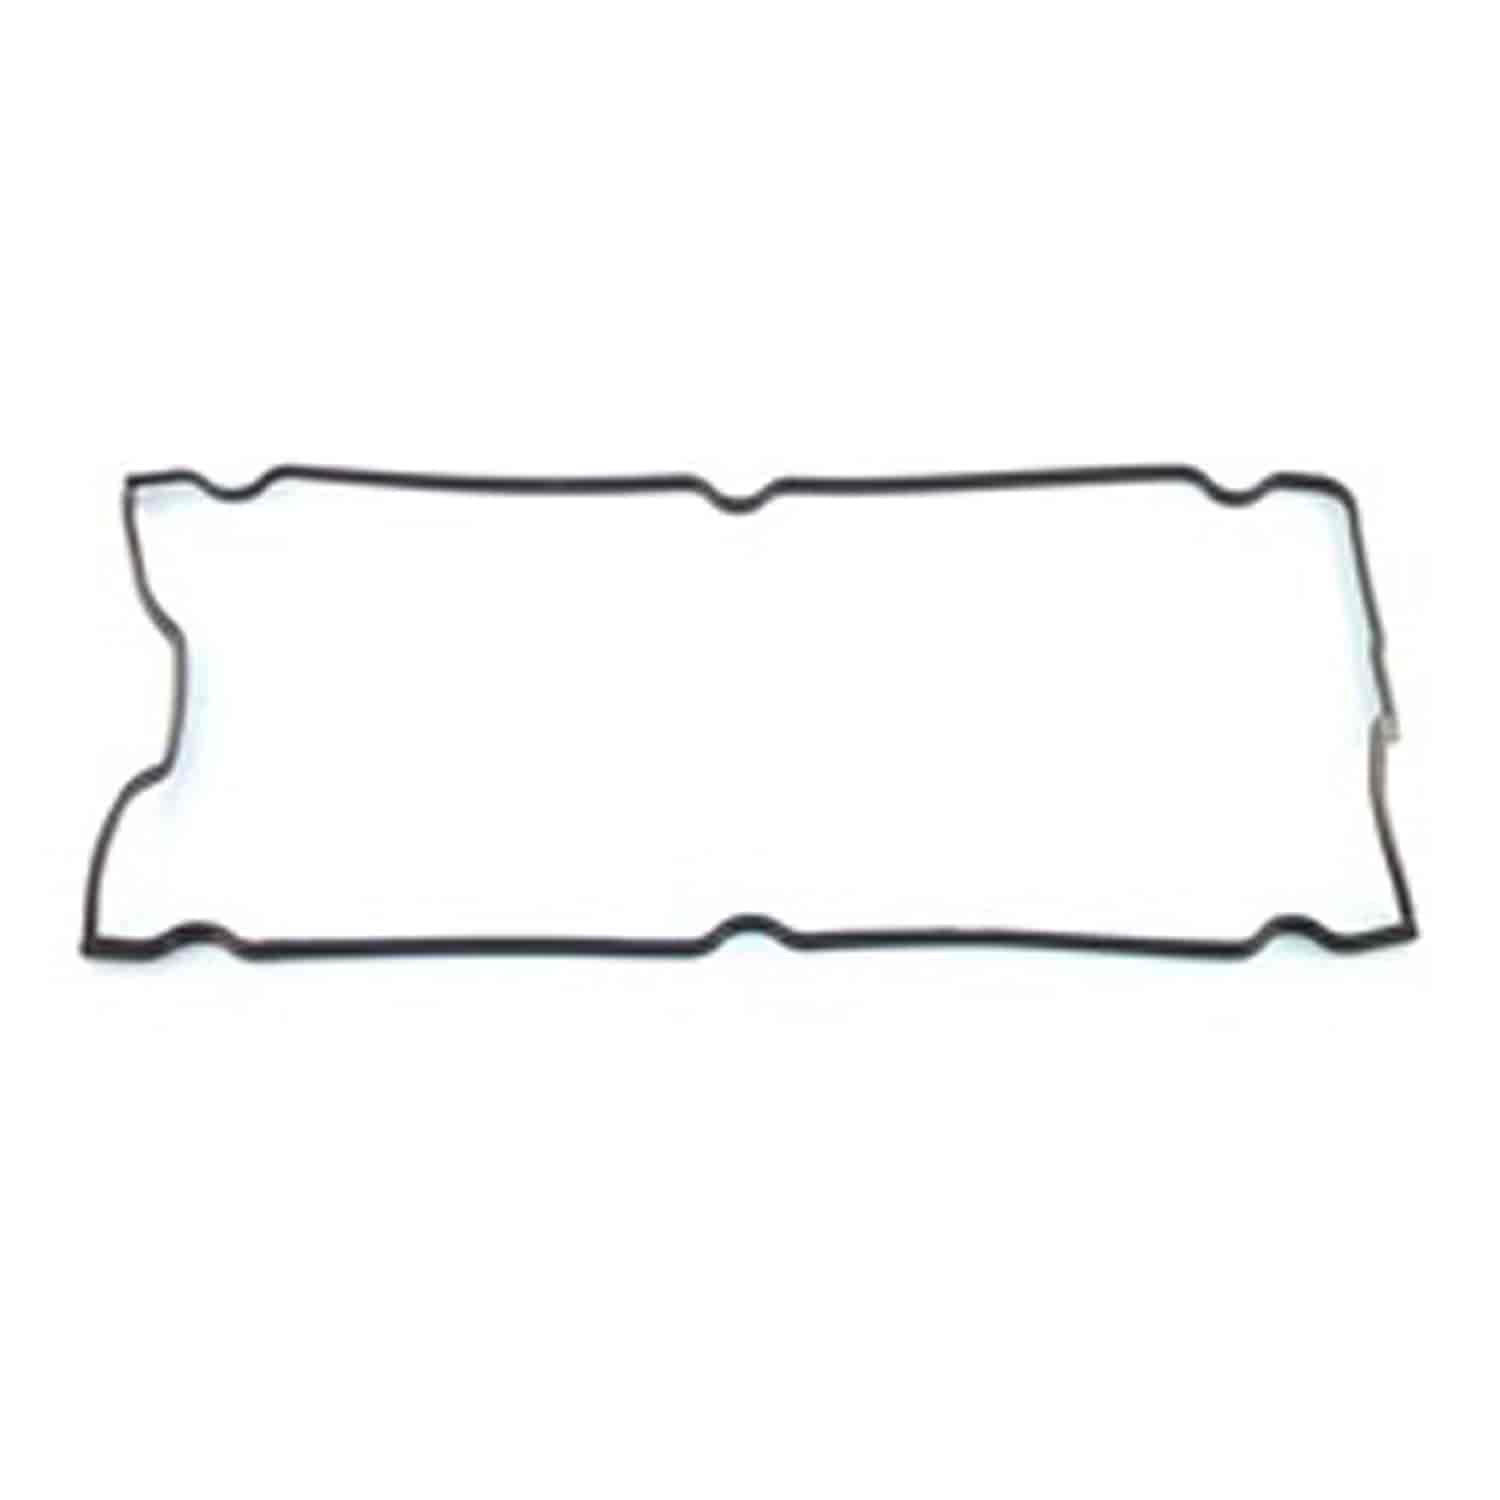 This valve cover gasket from Omix-ADA fits the 2.4L engine used in 02-05 Jeep Libertys and 03-06 Wranglers.